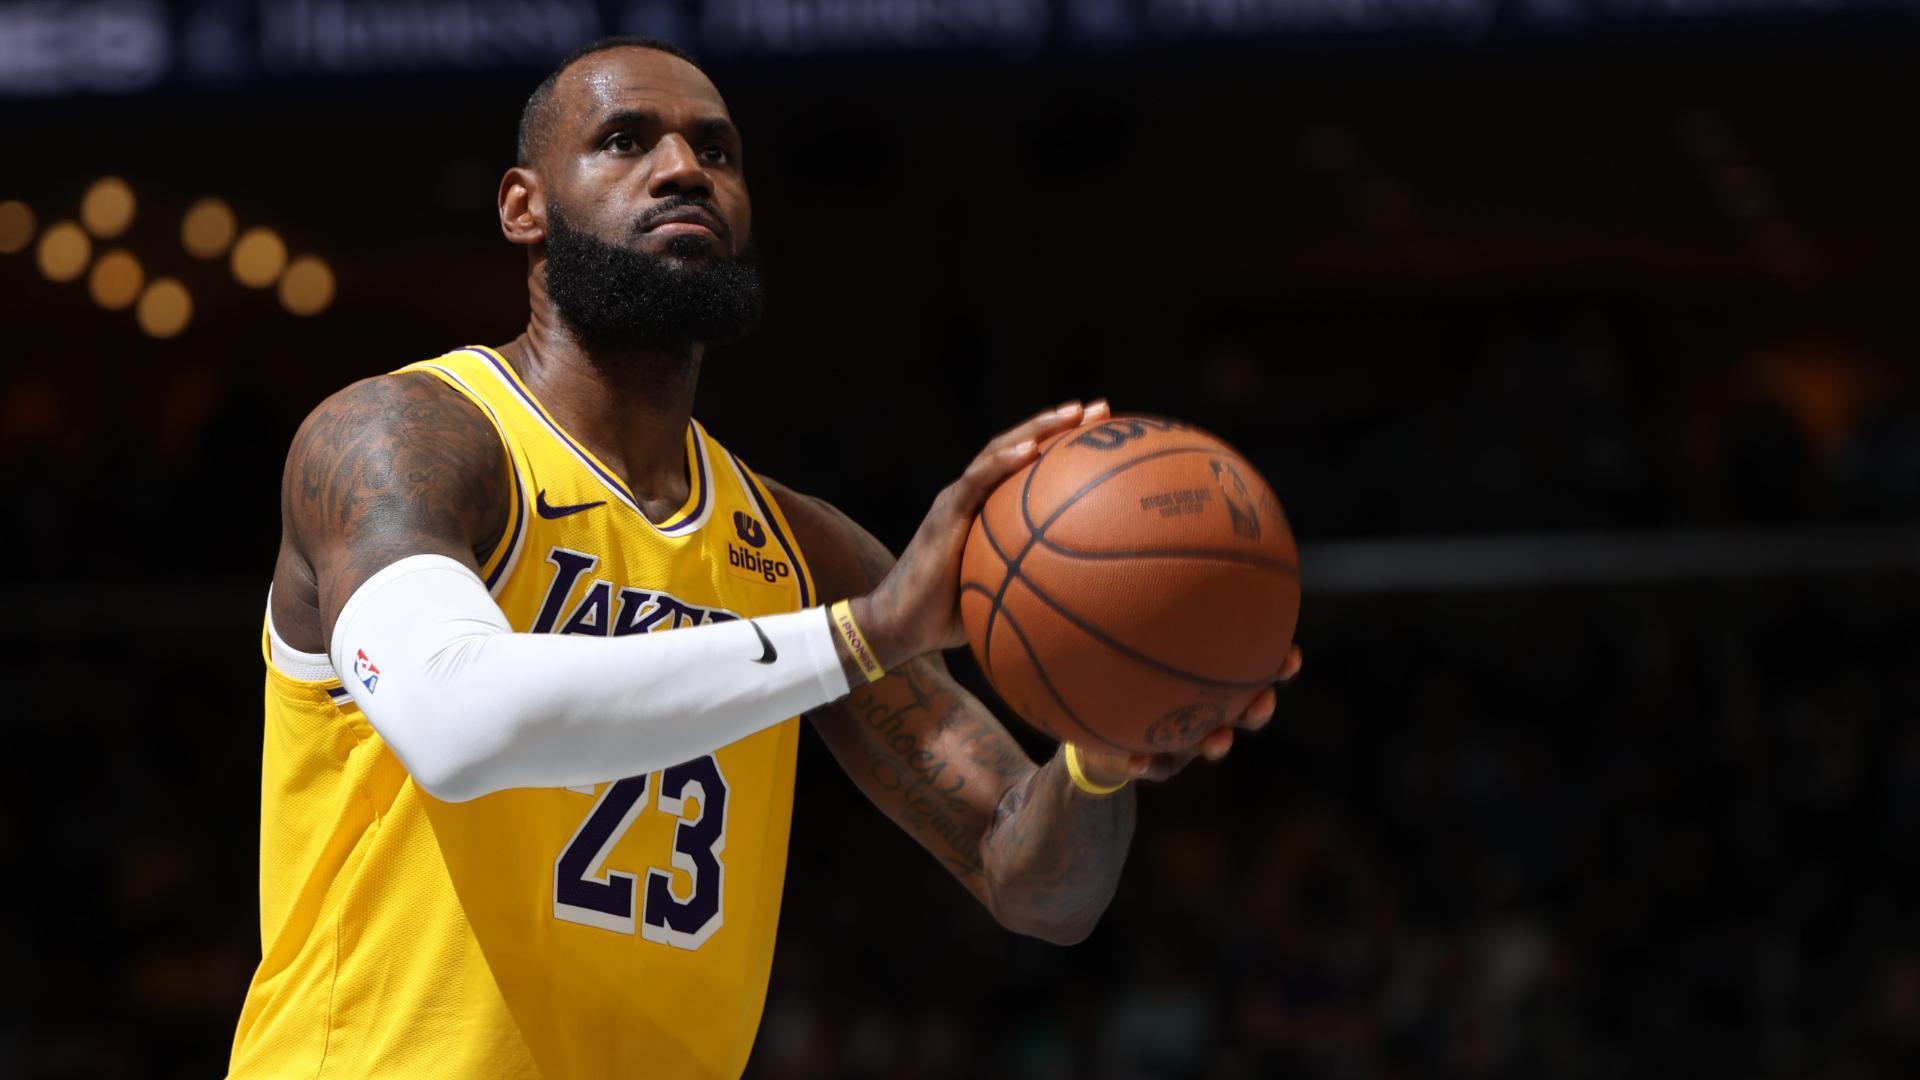 LeBron James has triple-double to help Lakers beat Grizzlies, 136-124